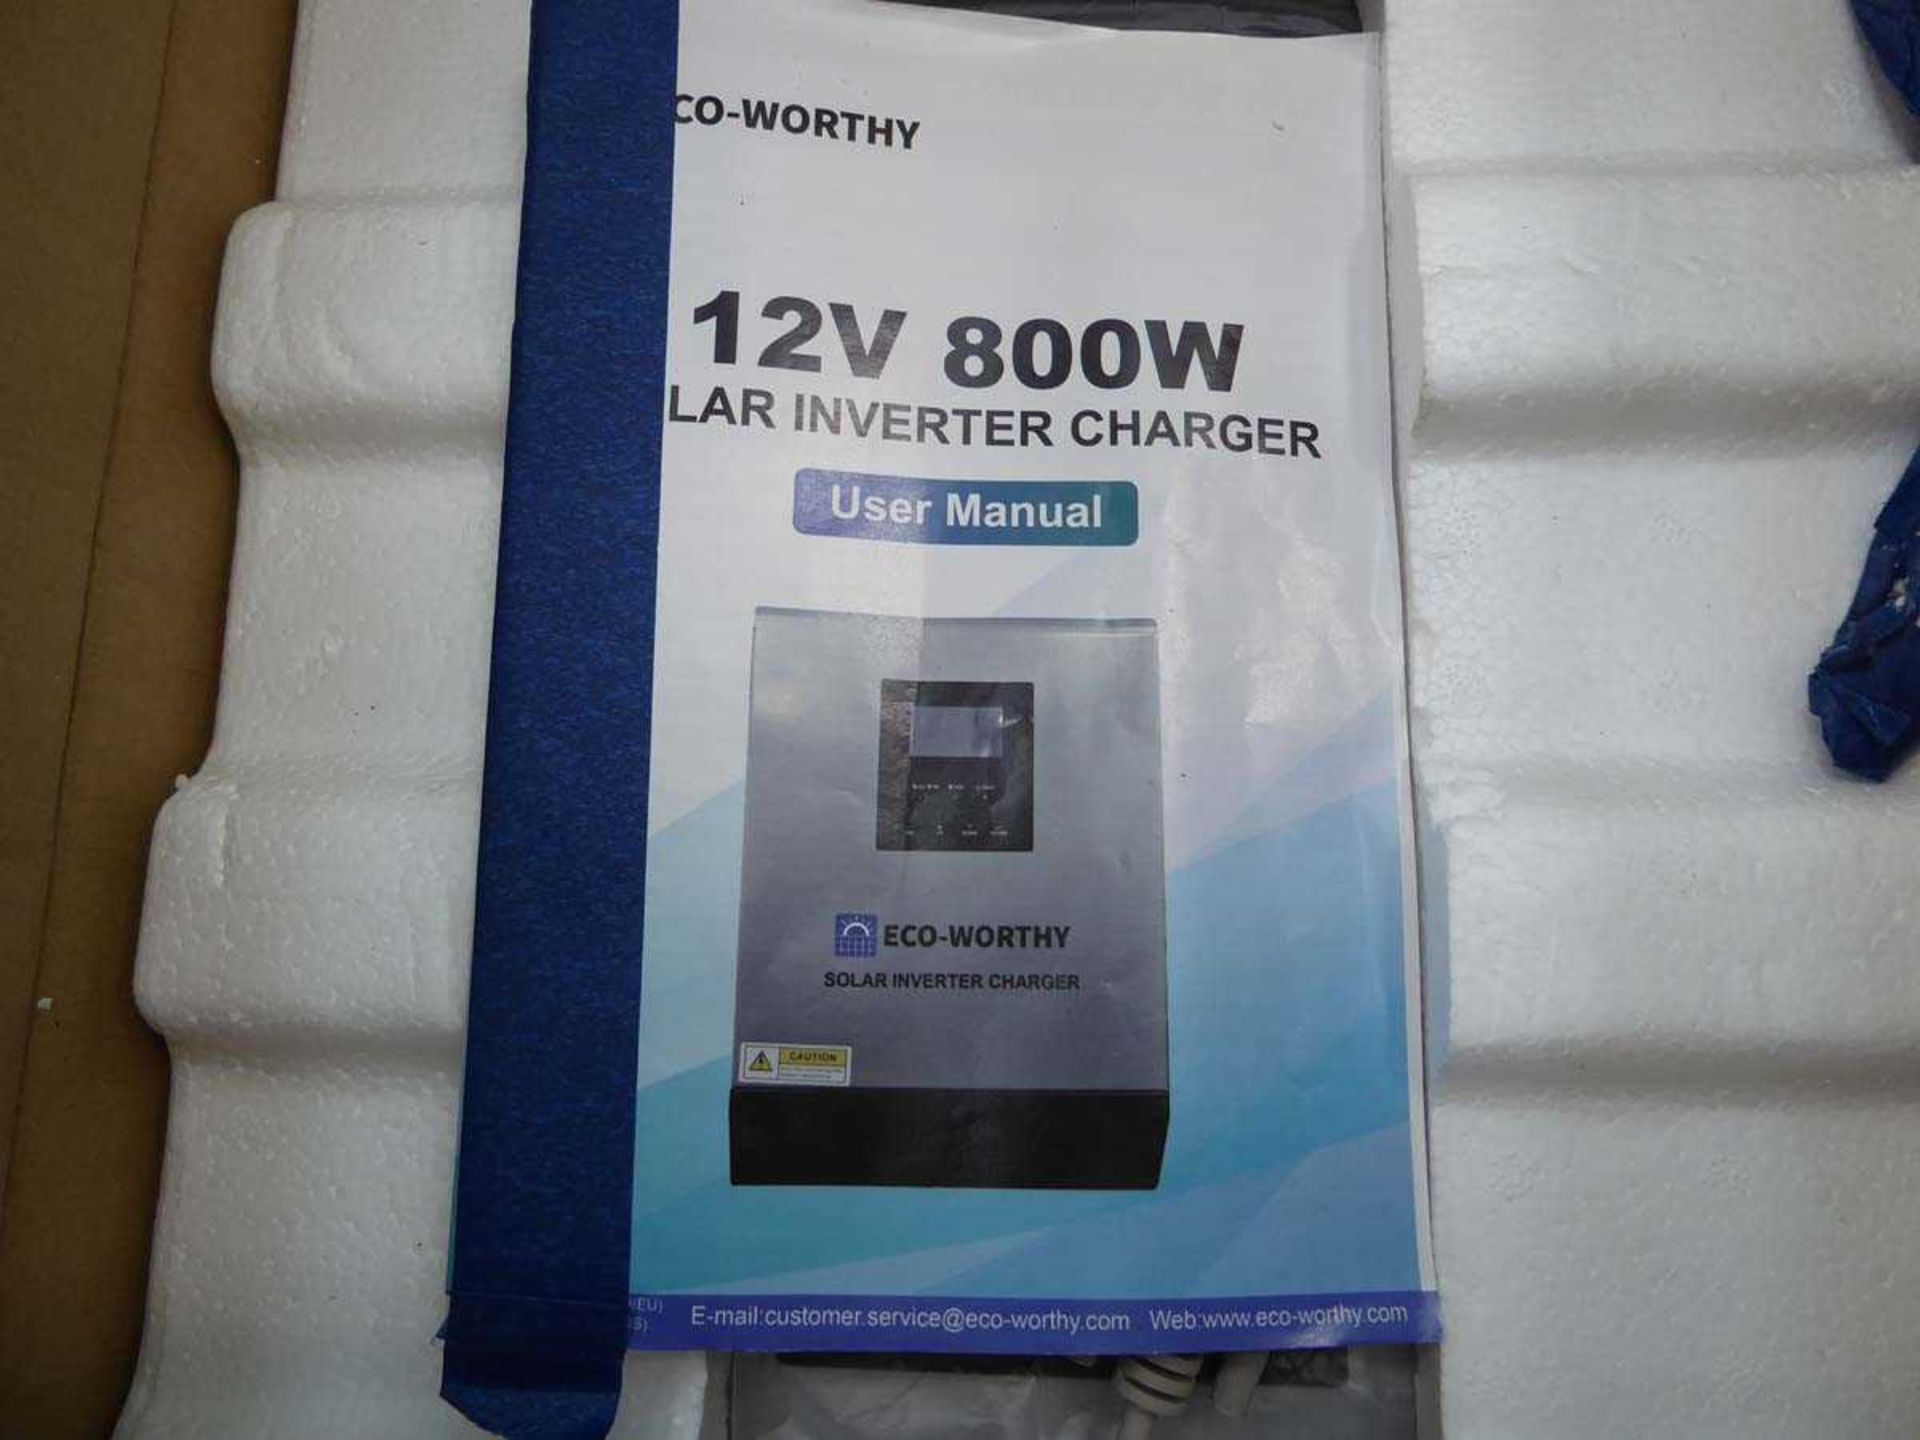 Inverter charger - Image 2 of 2